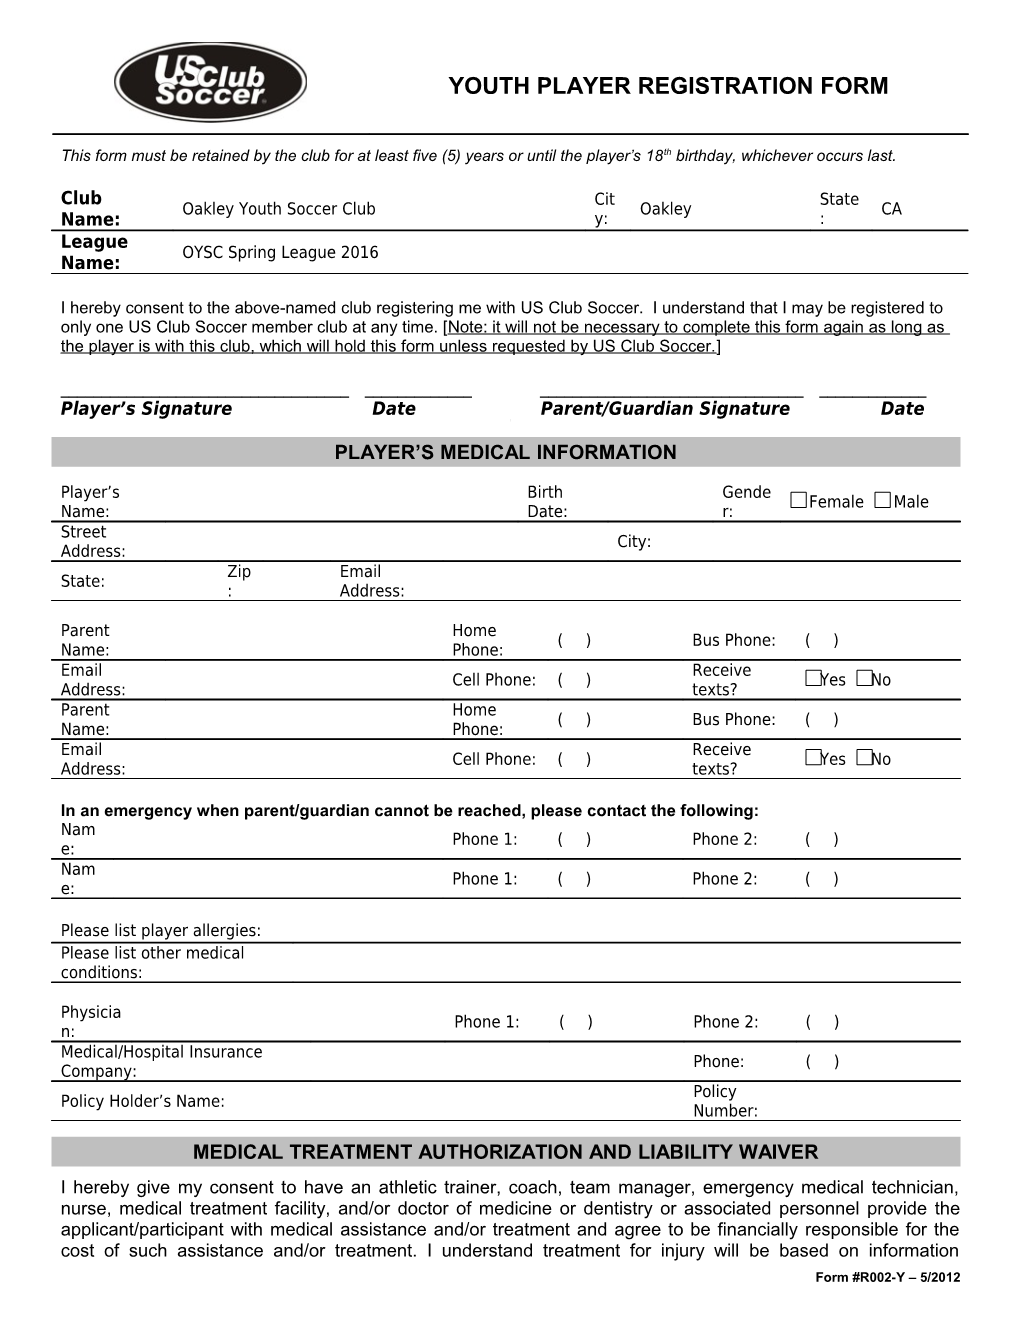 R002-Y - Youth Player Registration Form s1